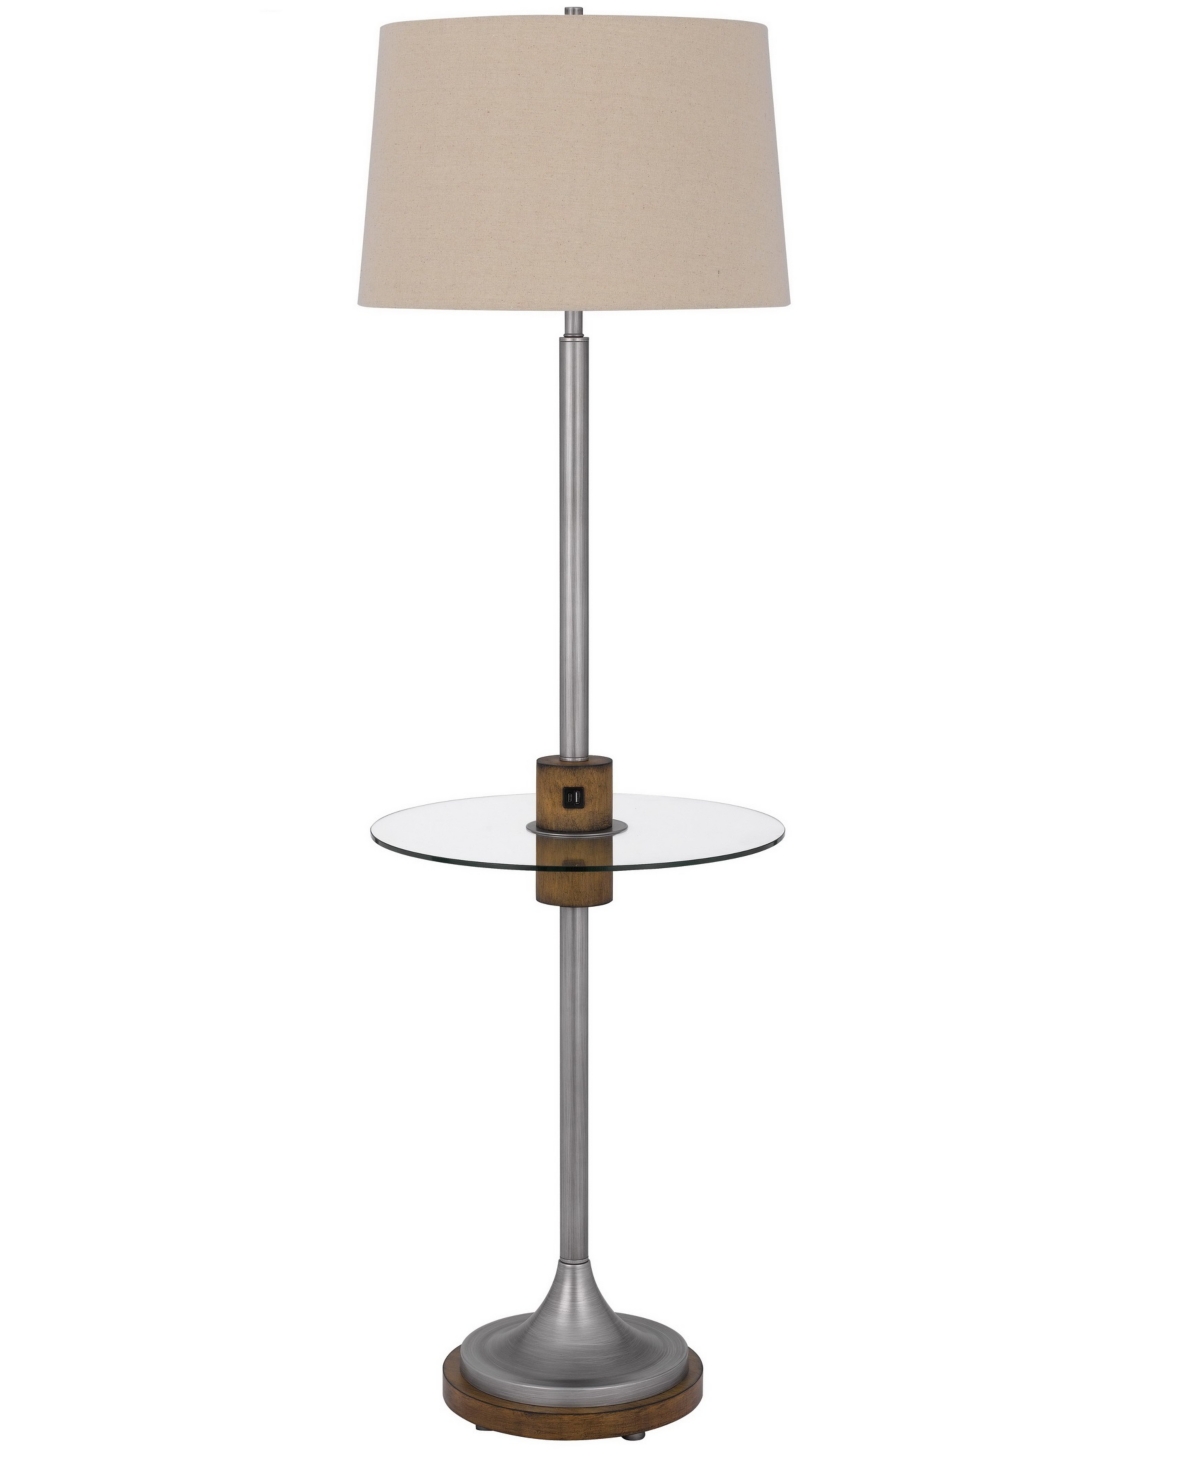 Cal Lighting 61" Height Floor Lamp With Glass Tray And Wood Accents In Antique Silver,wood